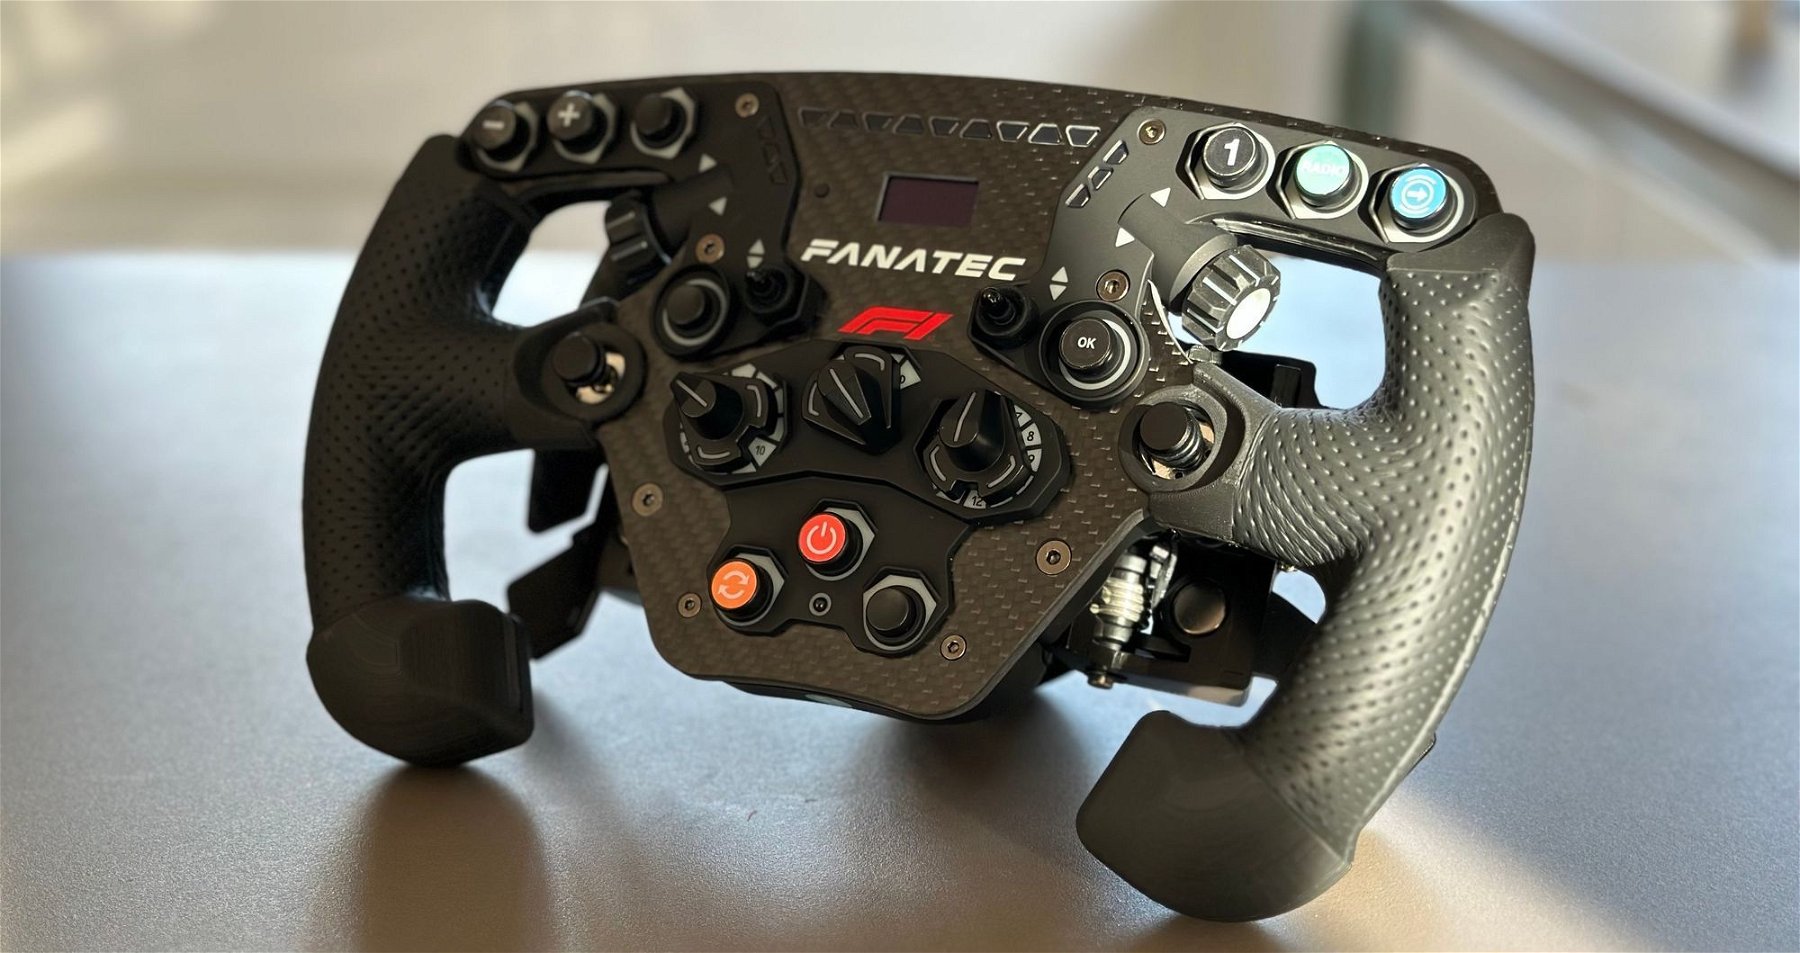 Fanatec F1 2021 Limited Edition wheel with custom perforated leather grips, owned by one of our F1Laps team members